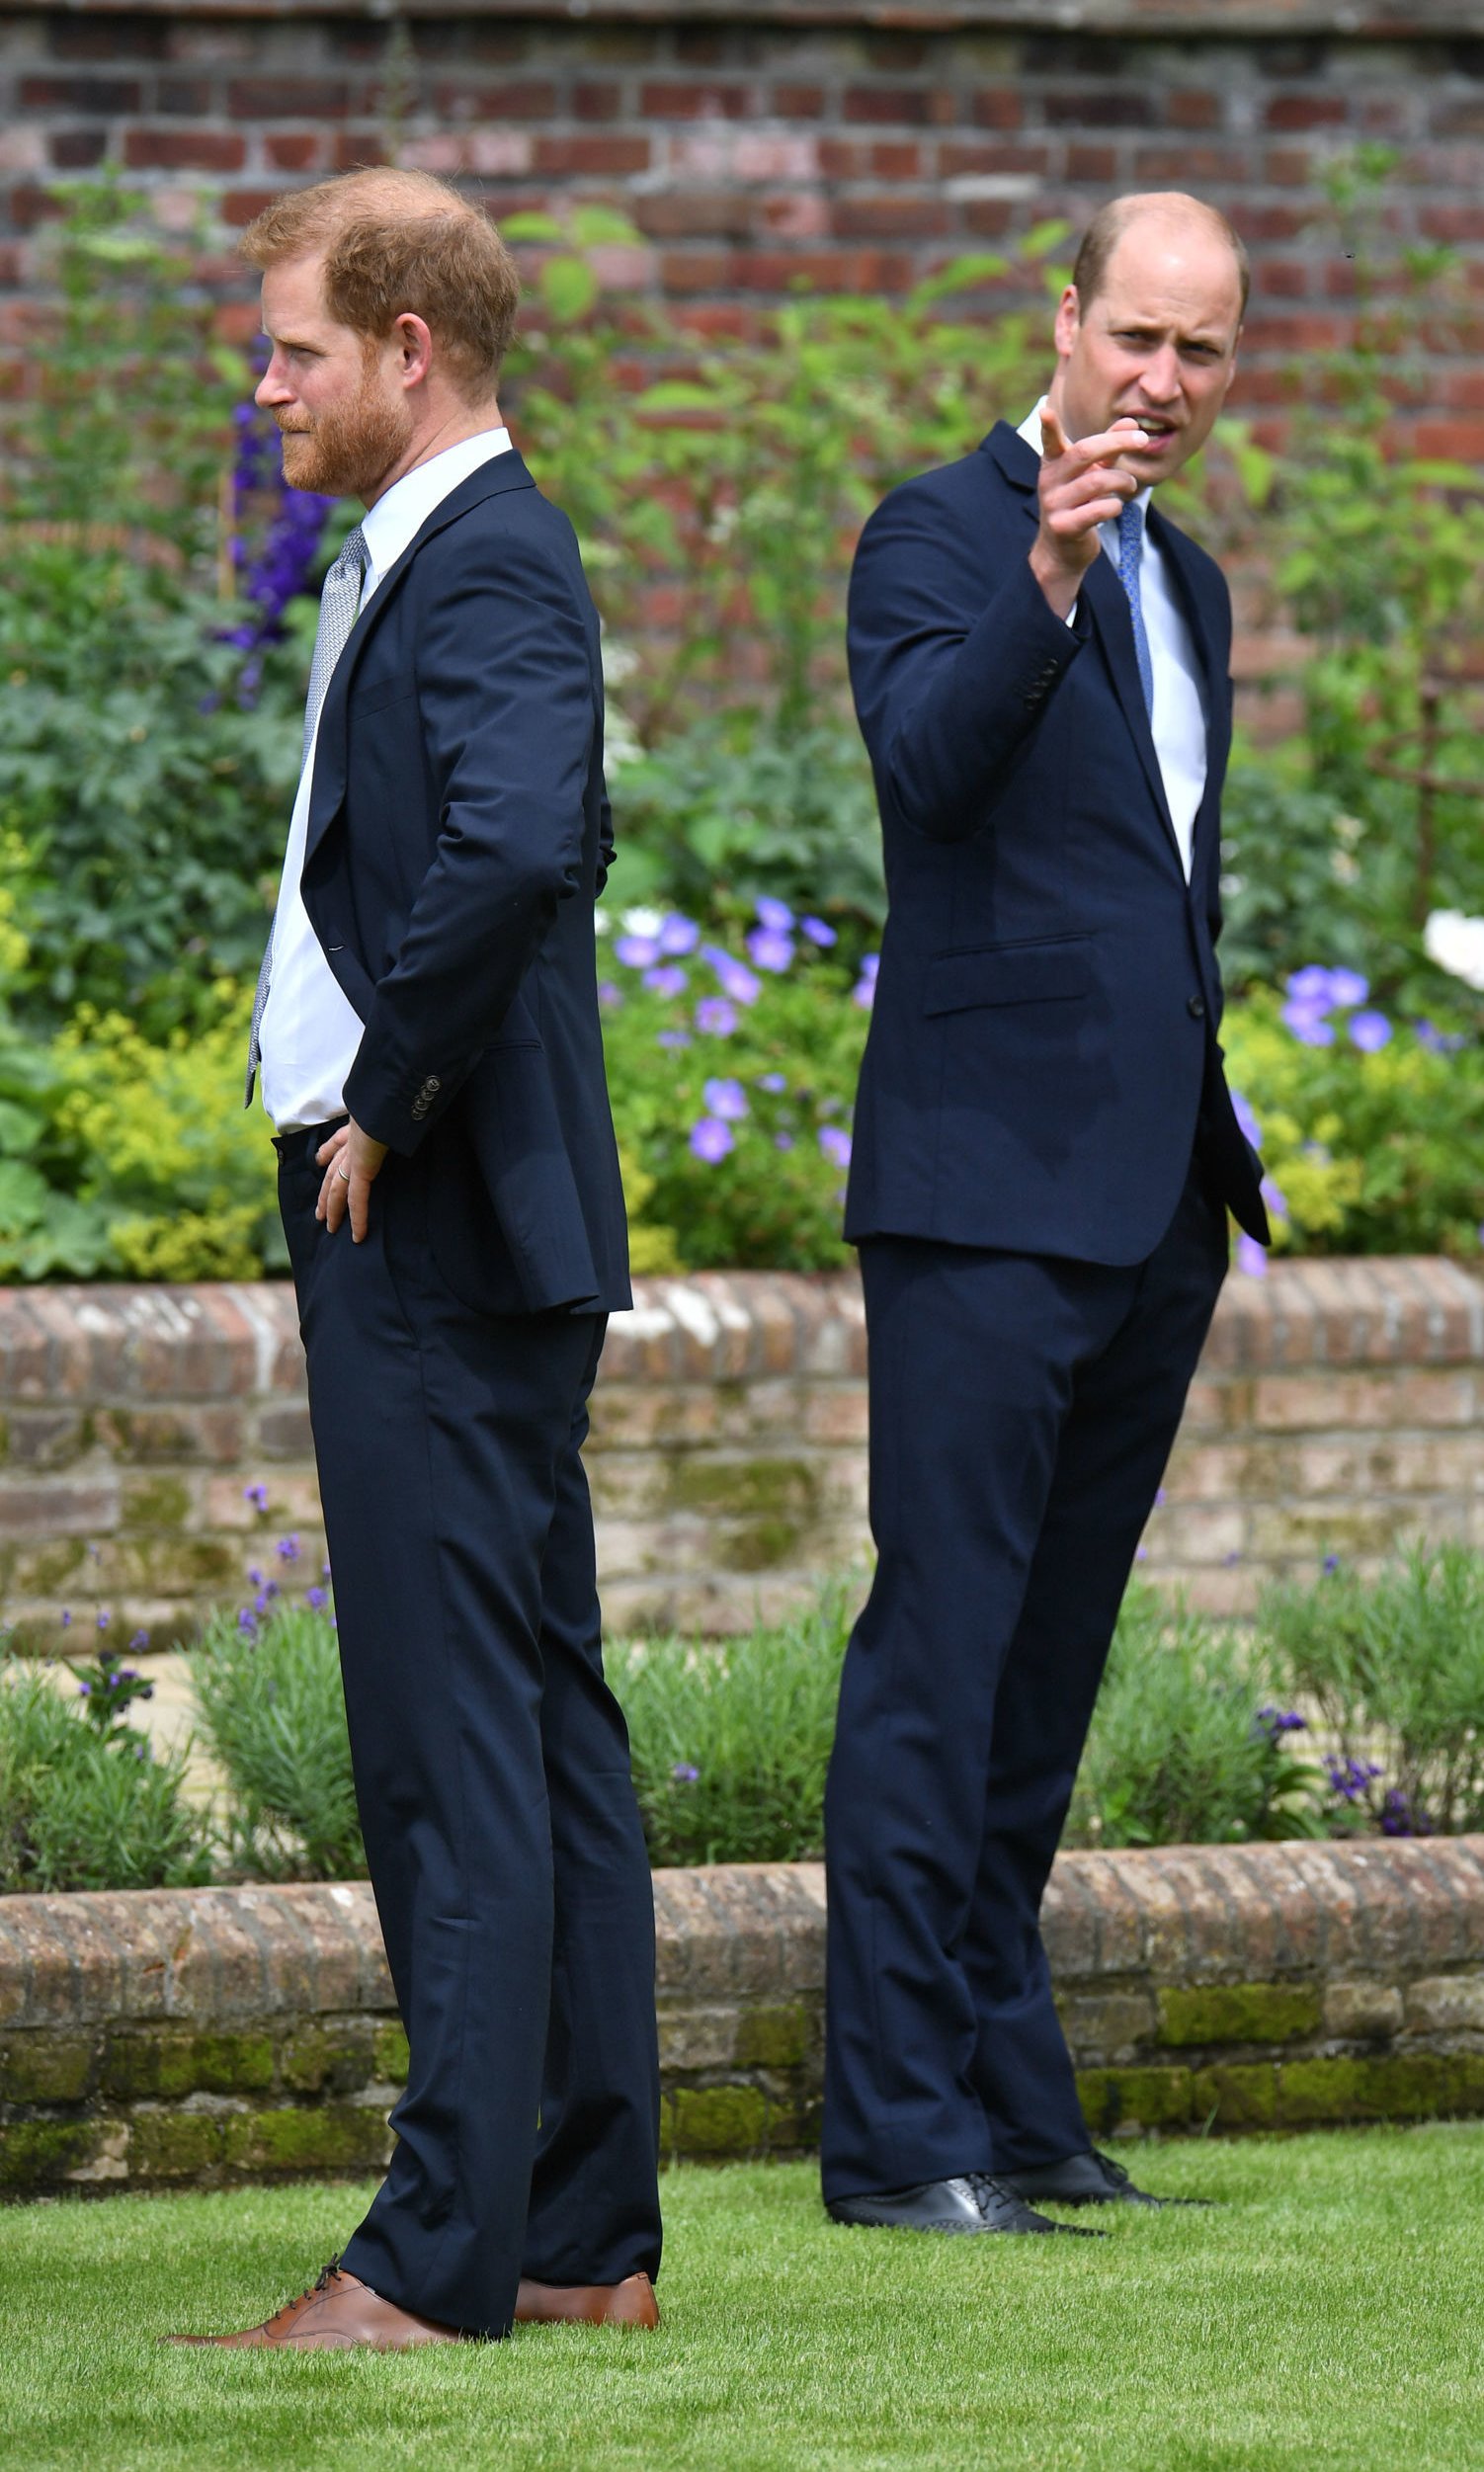 Prince Harry and Prince William during the unveiling of a statue they commissioned of their mother Princess Diana at Kensington Palace, on July 1, 2021, in London, England. | Source: Getty Images